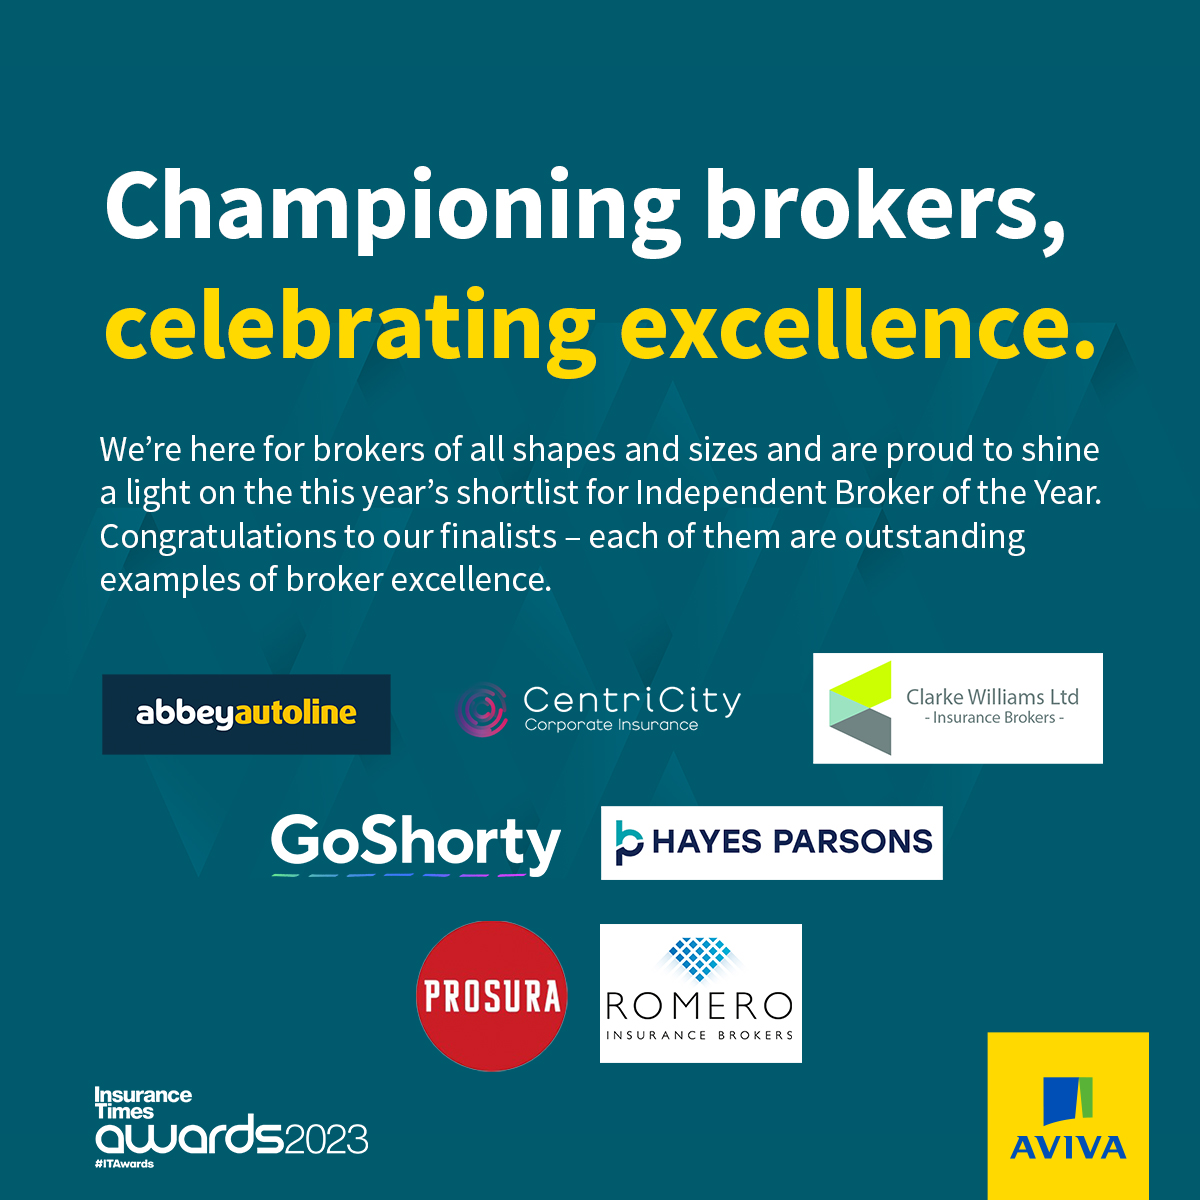 This year's #ITAwards are here! 🎉One of seven amazing brokers will be presented with the 'Independent Broker of the Year Award', proudly sponsored by the Aviva Broker team. From our team to yours, we wish you the best of luck - our fingers are crossed for you 🤞 #HereForBrokers